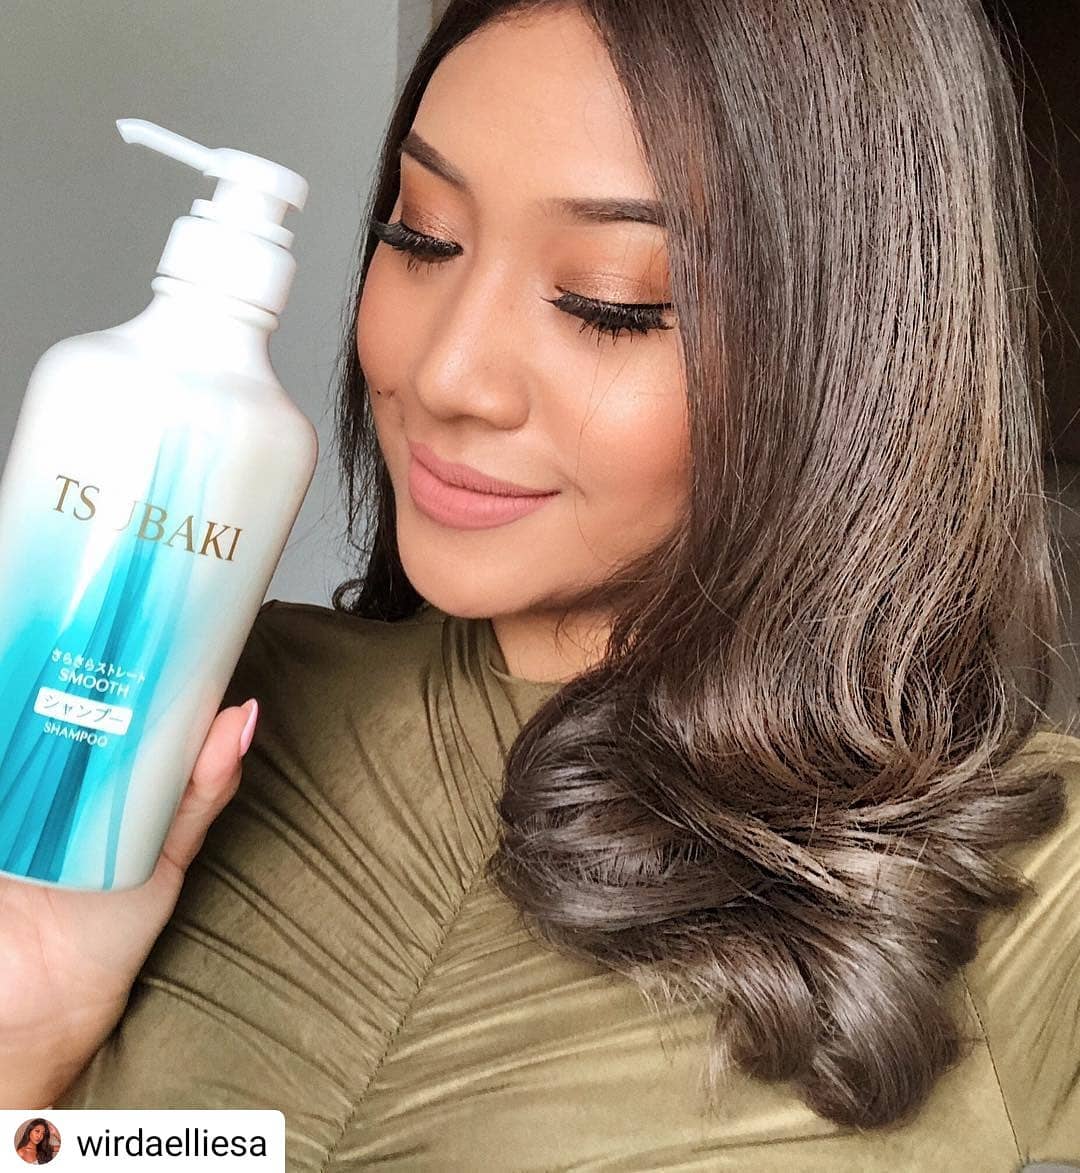 Official Tsubaki Singapore - Happy Labour Day! May your day be as smooth & shiny as her hair 😍

#Repost @wirdaelliesa
• • • • •
Tsubaki Challenge! I am currently using @tsubaki_sg shampoo & conditione...